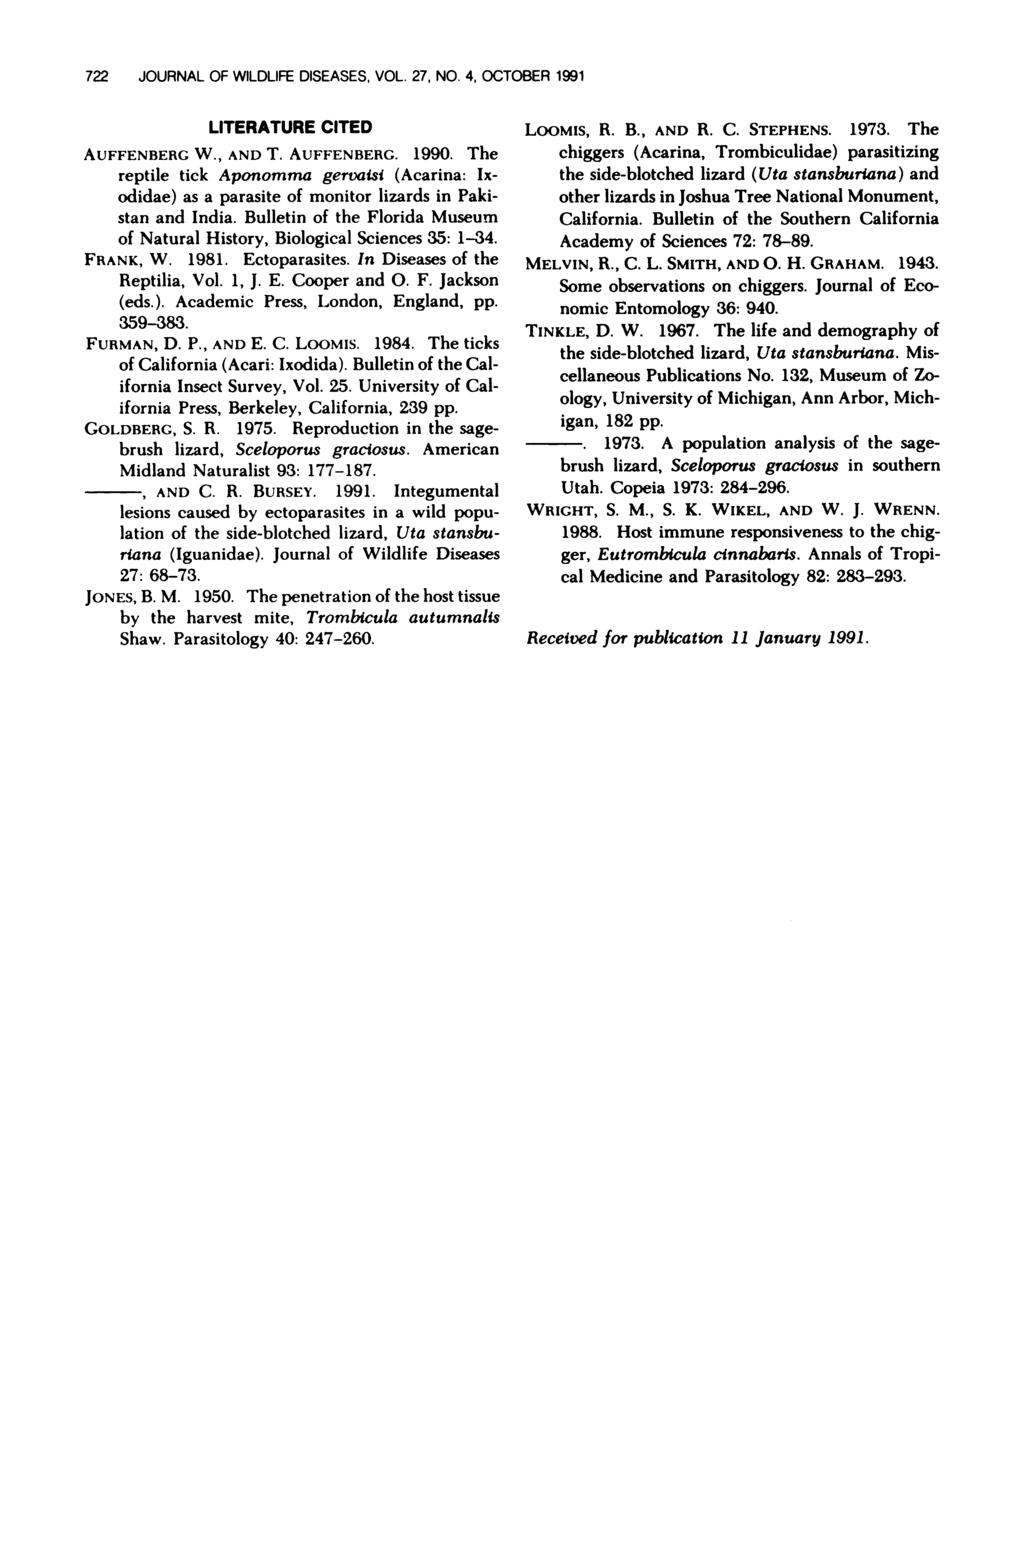 722 JOURNAL OF WILDLIFE DISEASES, VOL. 27, NO. 4, OCTOBER 1991 LITERATURE CITED AUFFENBERG W., AND T. AUFFENBERG. 1990.